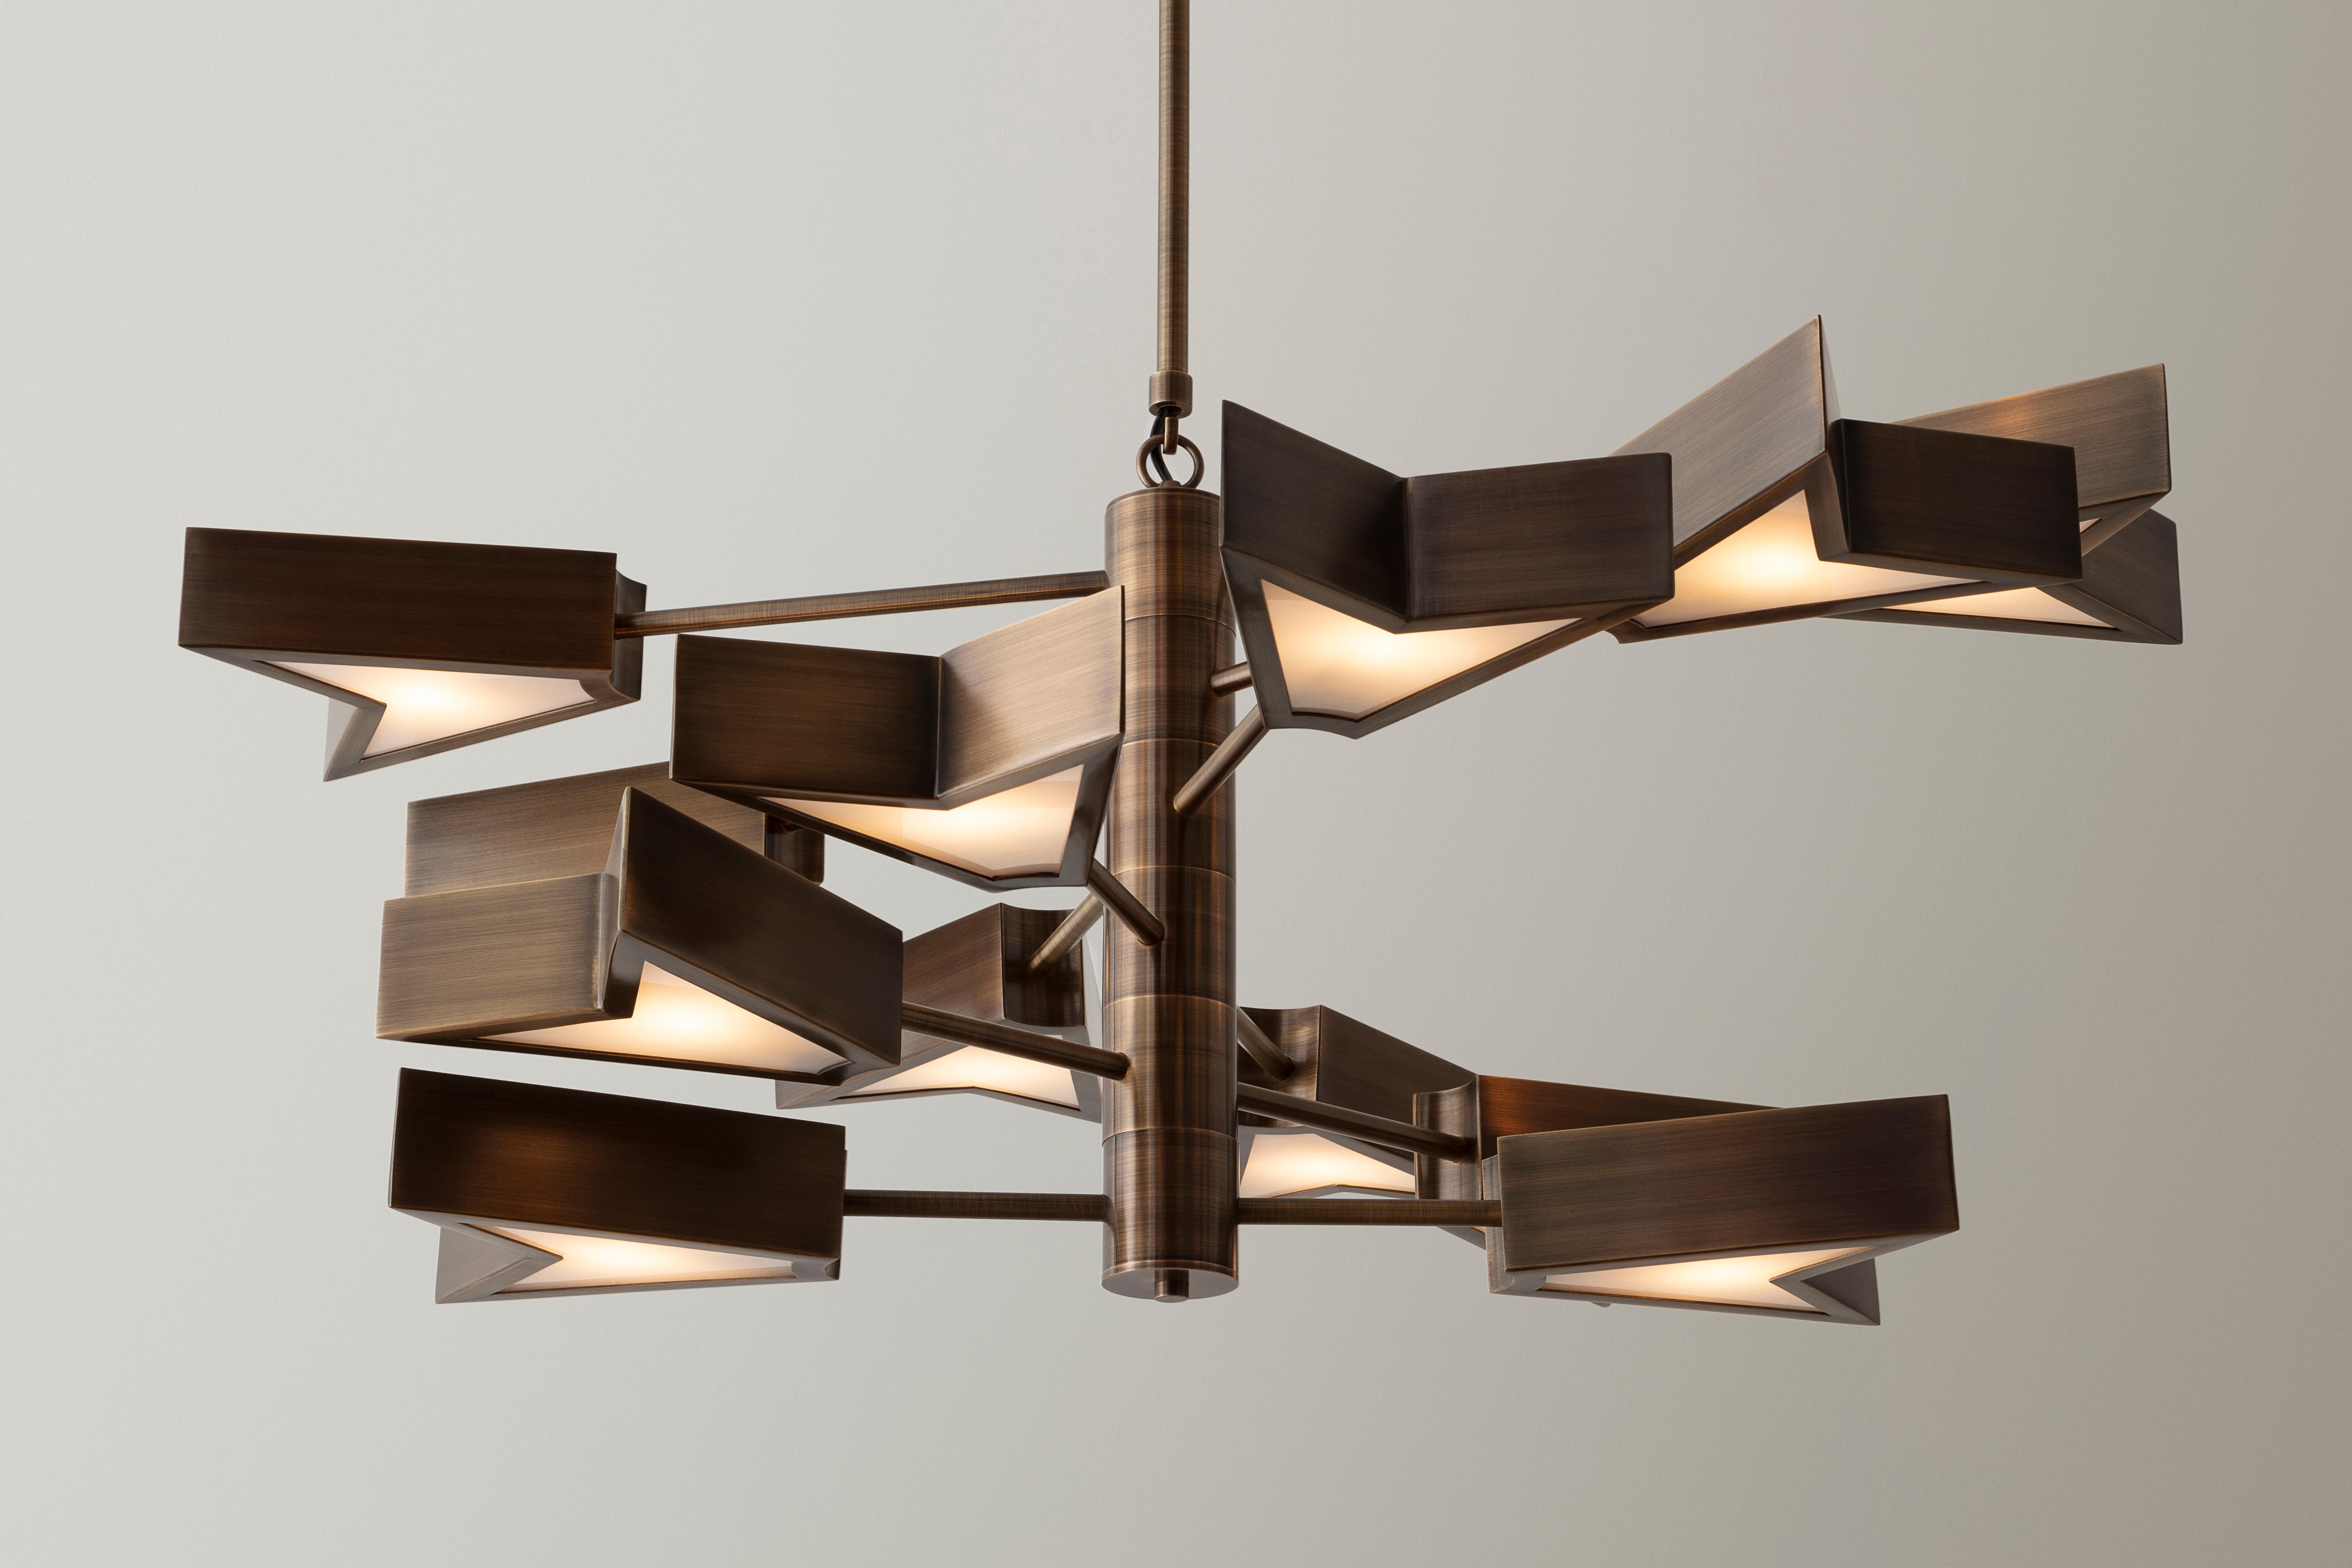 The Osiris chandelier 6.12 is a modular lighting fixture made from hand formed brass components. Using a small kit of parts, many unique designs can be fabricated. The brass fixture body is offered in six artisanal finishes. Soft light filters